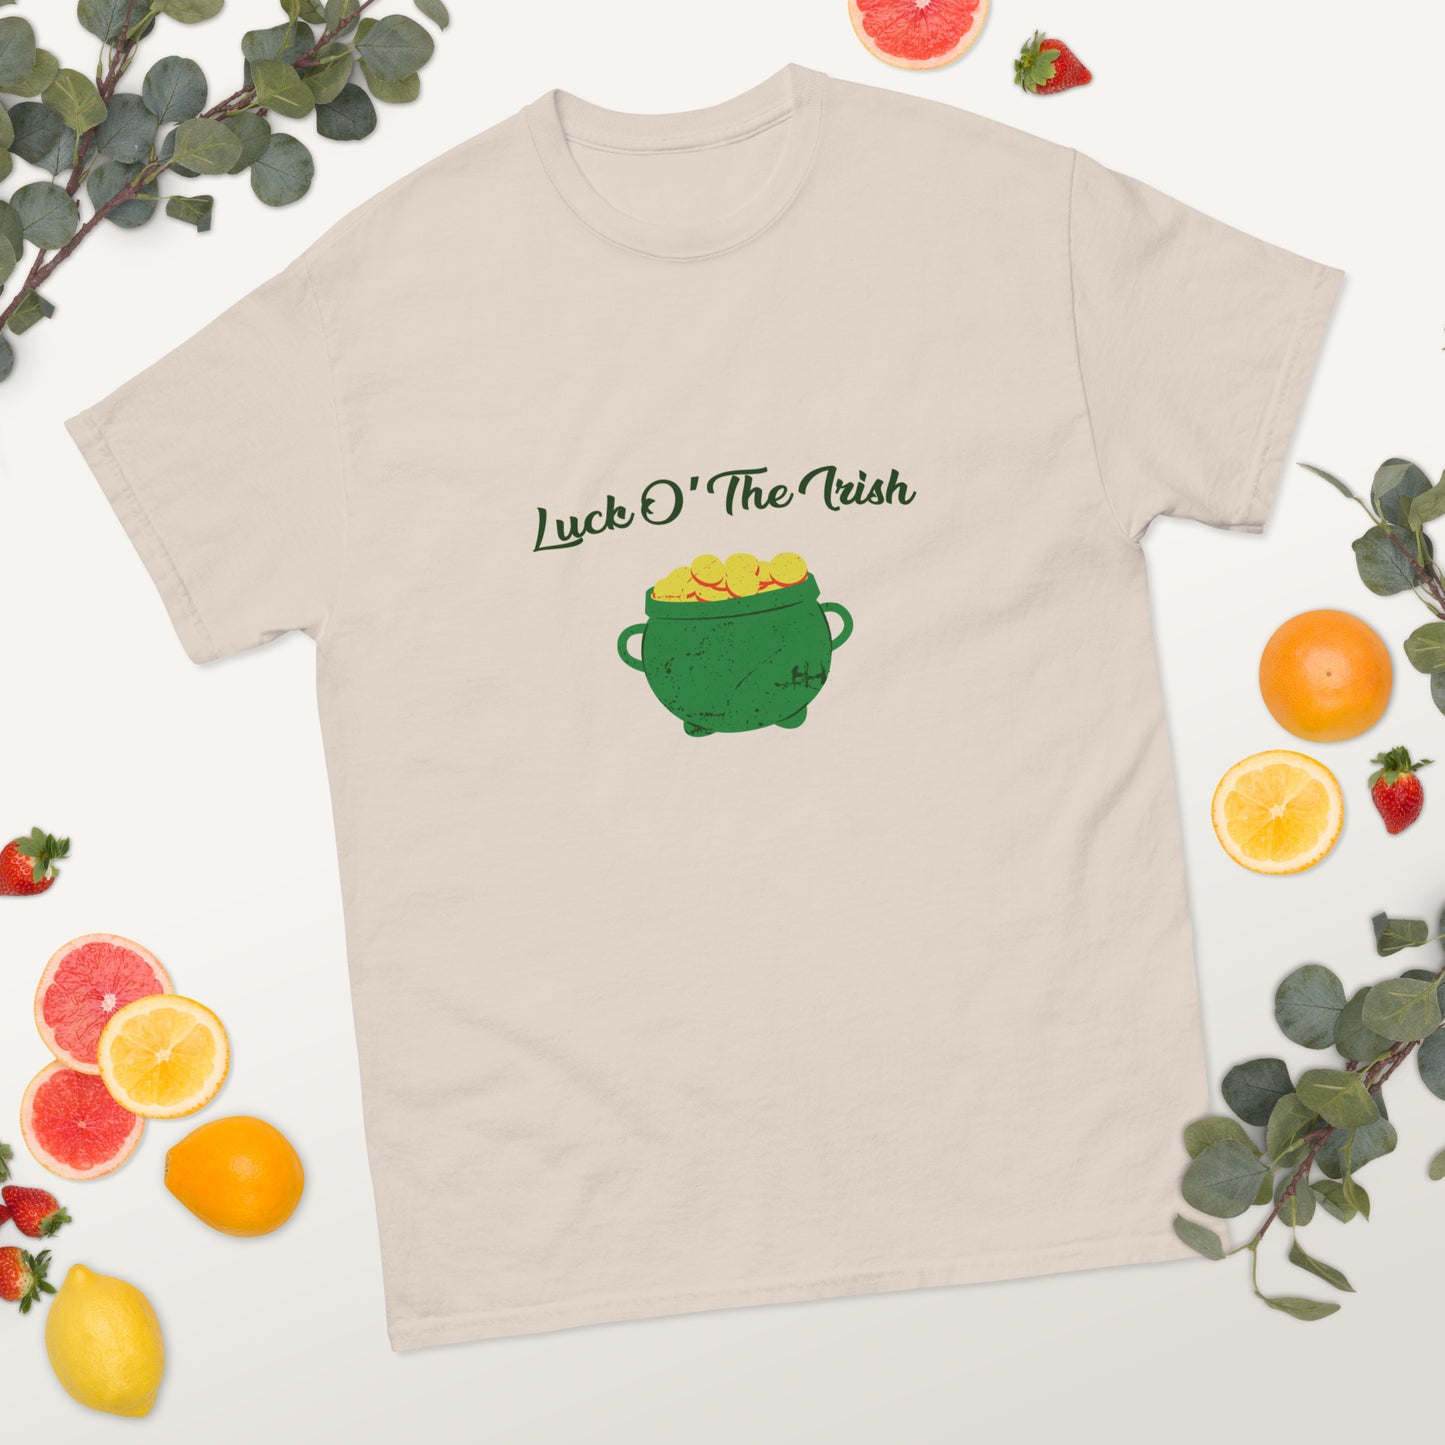 Comfortable and stylish Luck O’ The Irish cotton tee for men